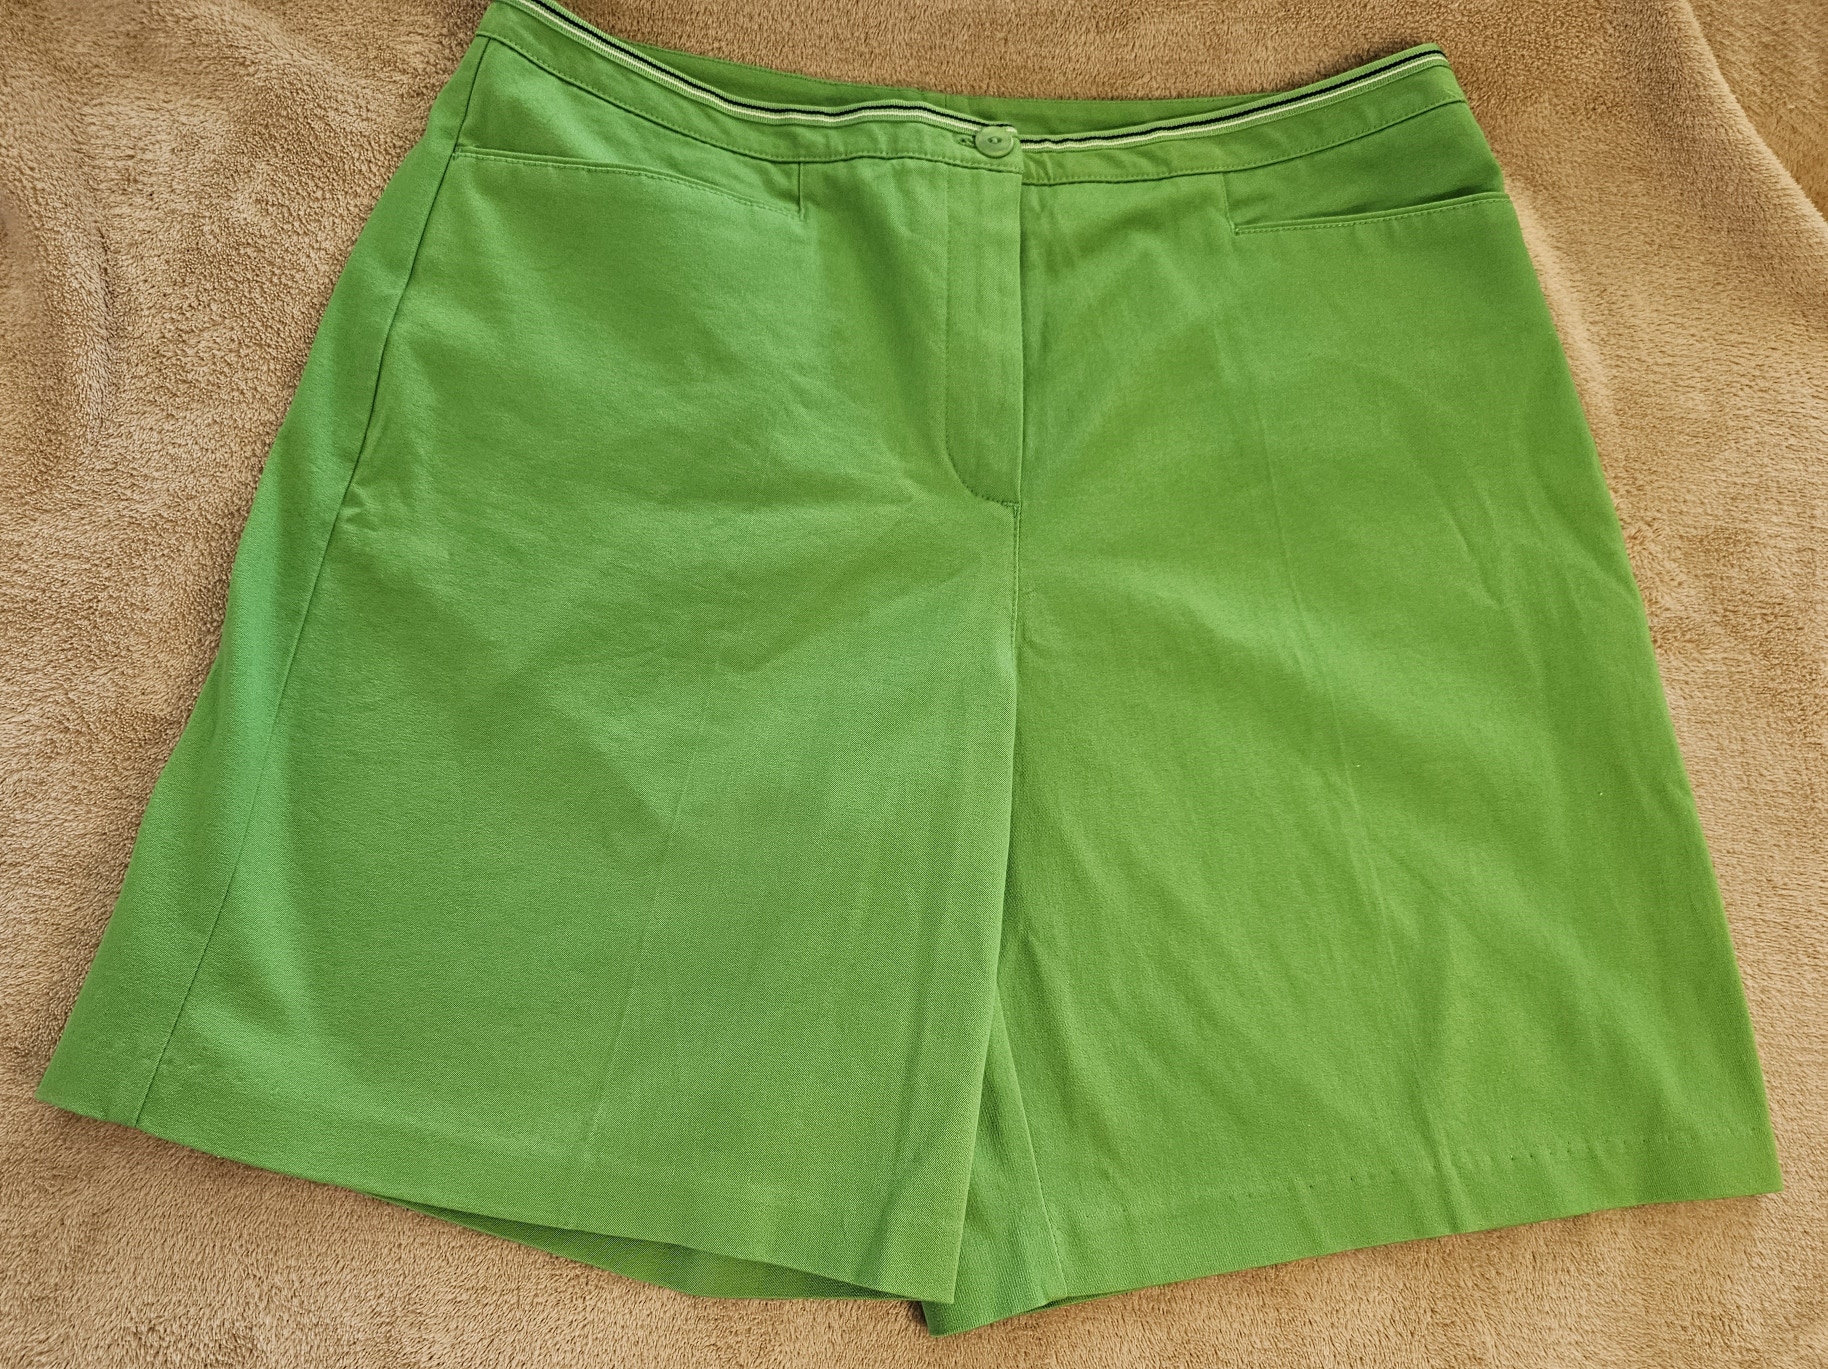 New EP Pro Women's Size 10 Green Golf Shorts